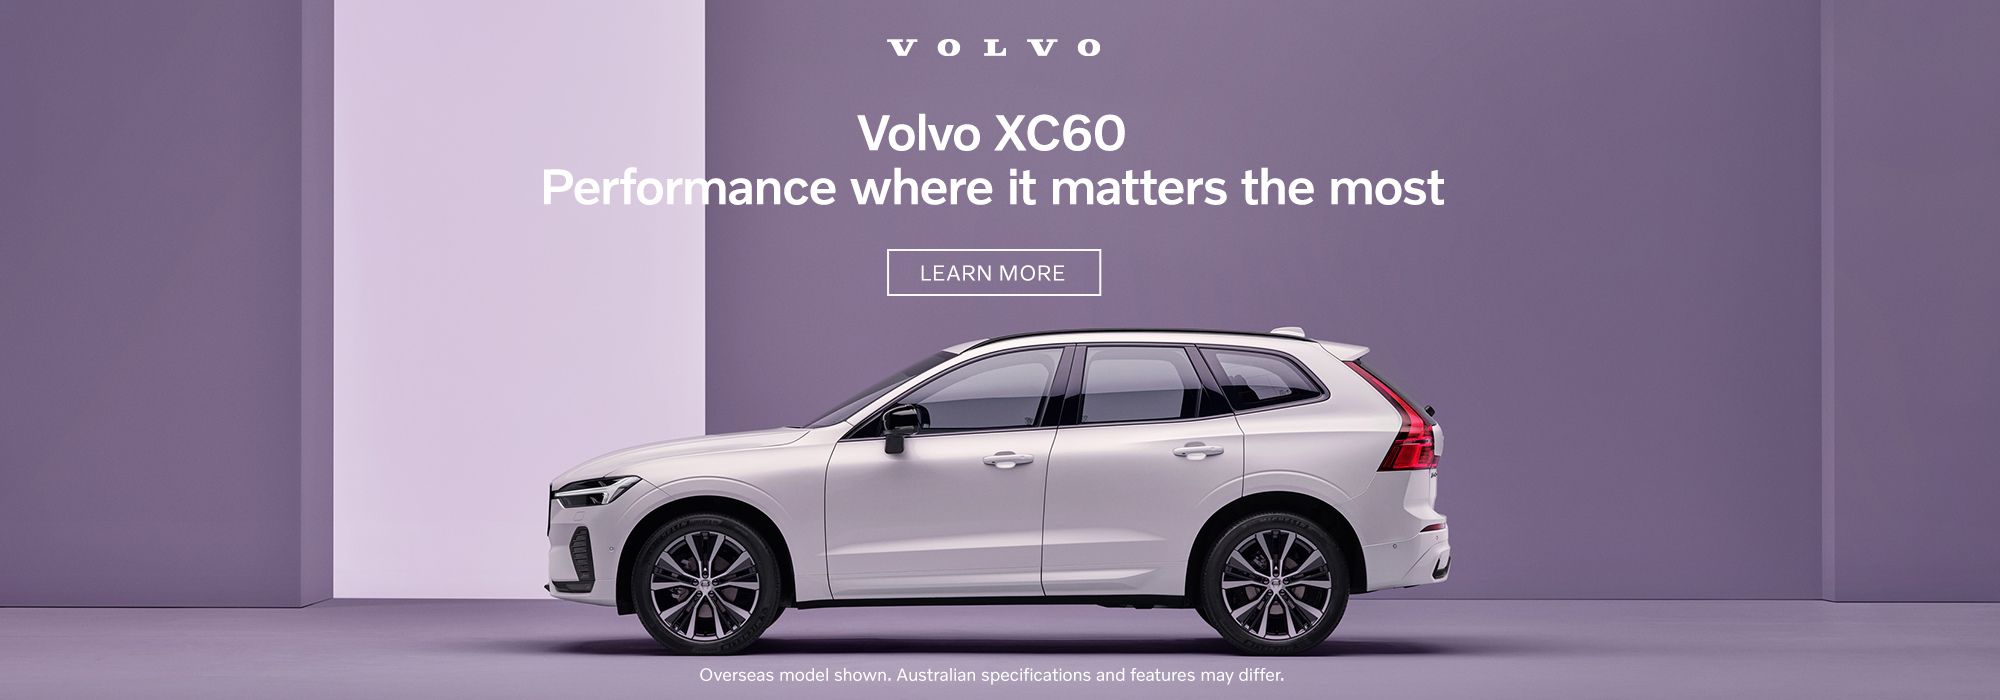 Volvo XC60 - Performance where it matters the most. Learn more